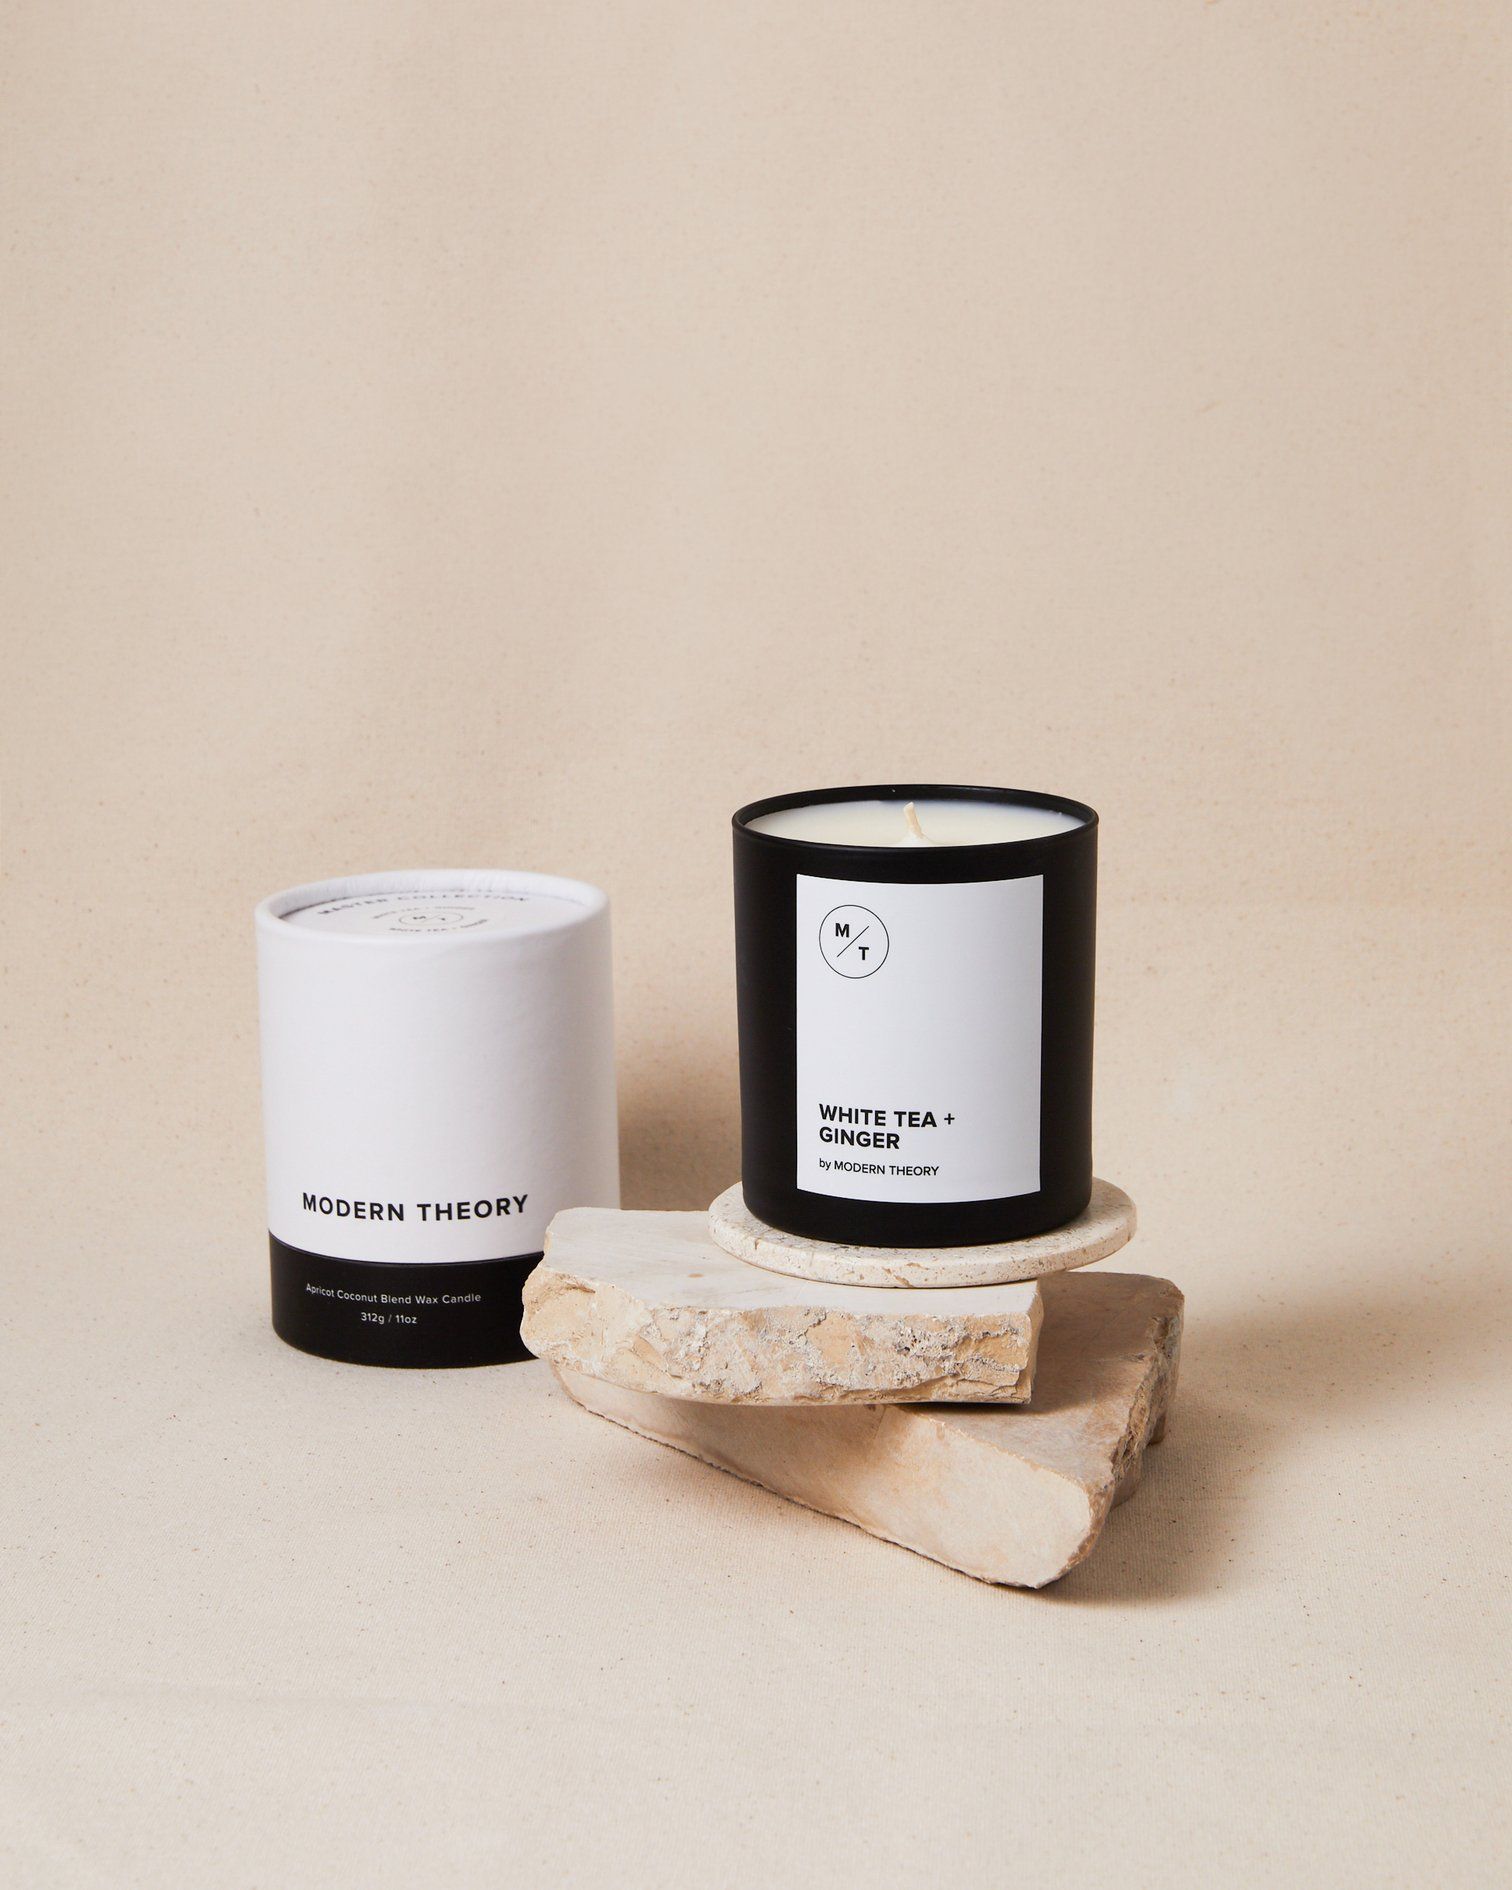 Product Image for White Tea + Ginger Candle